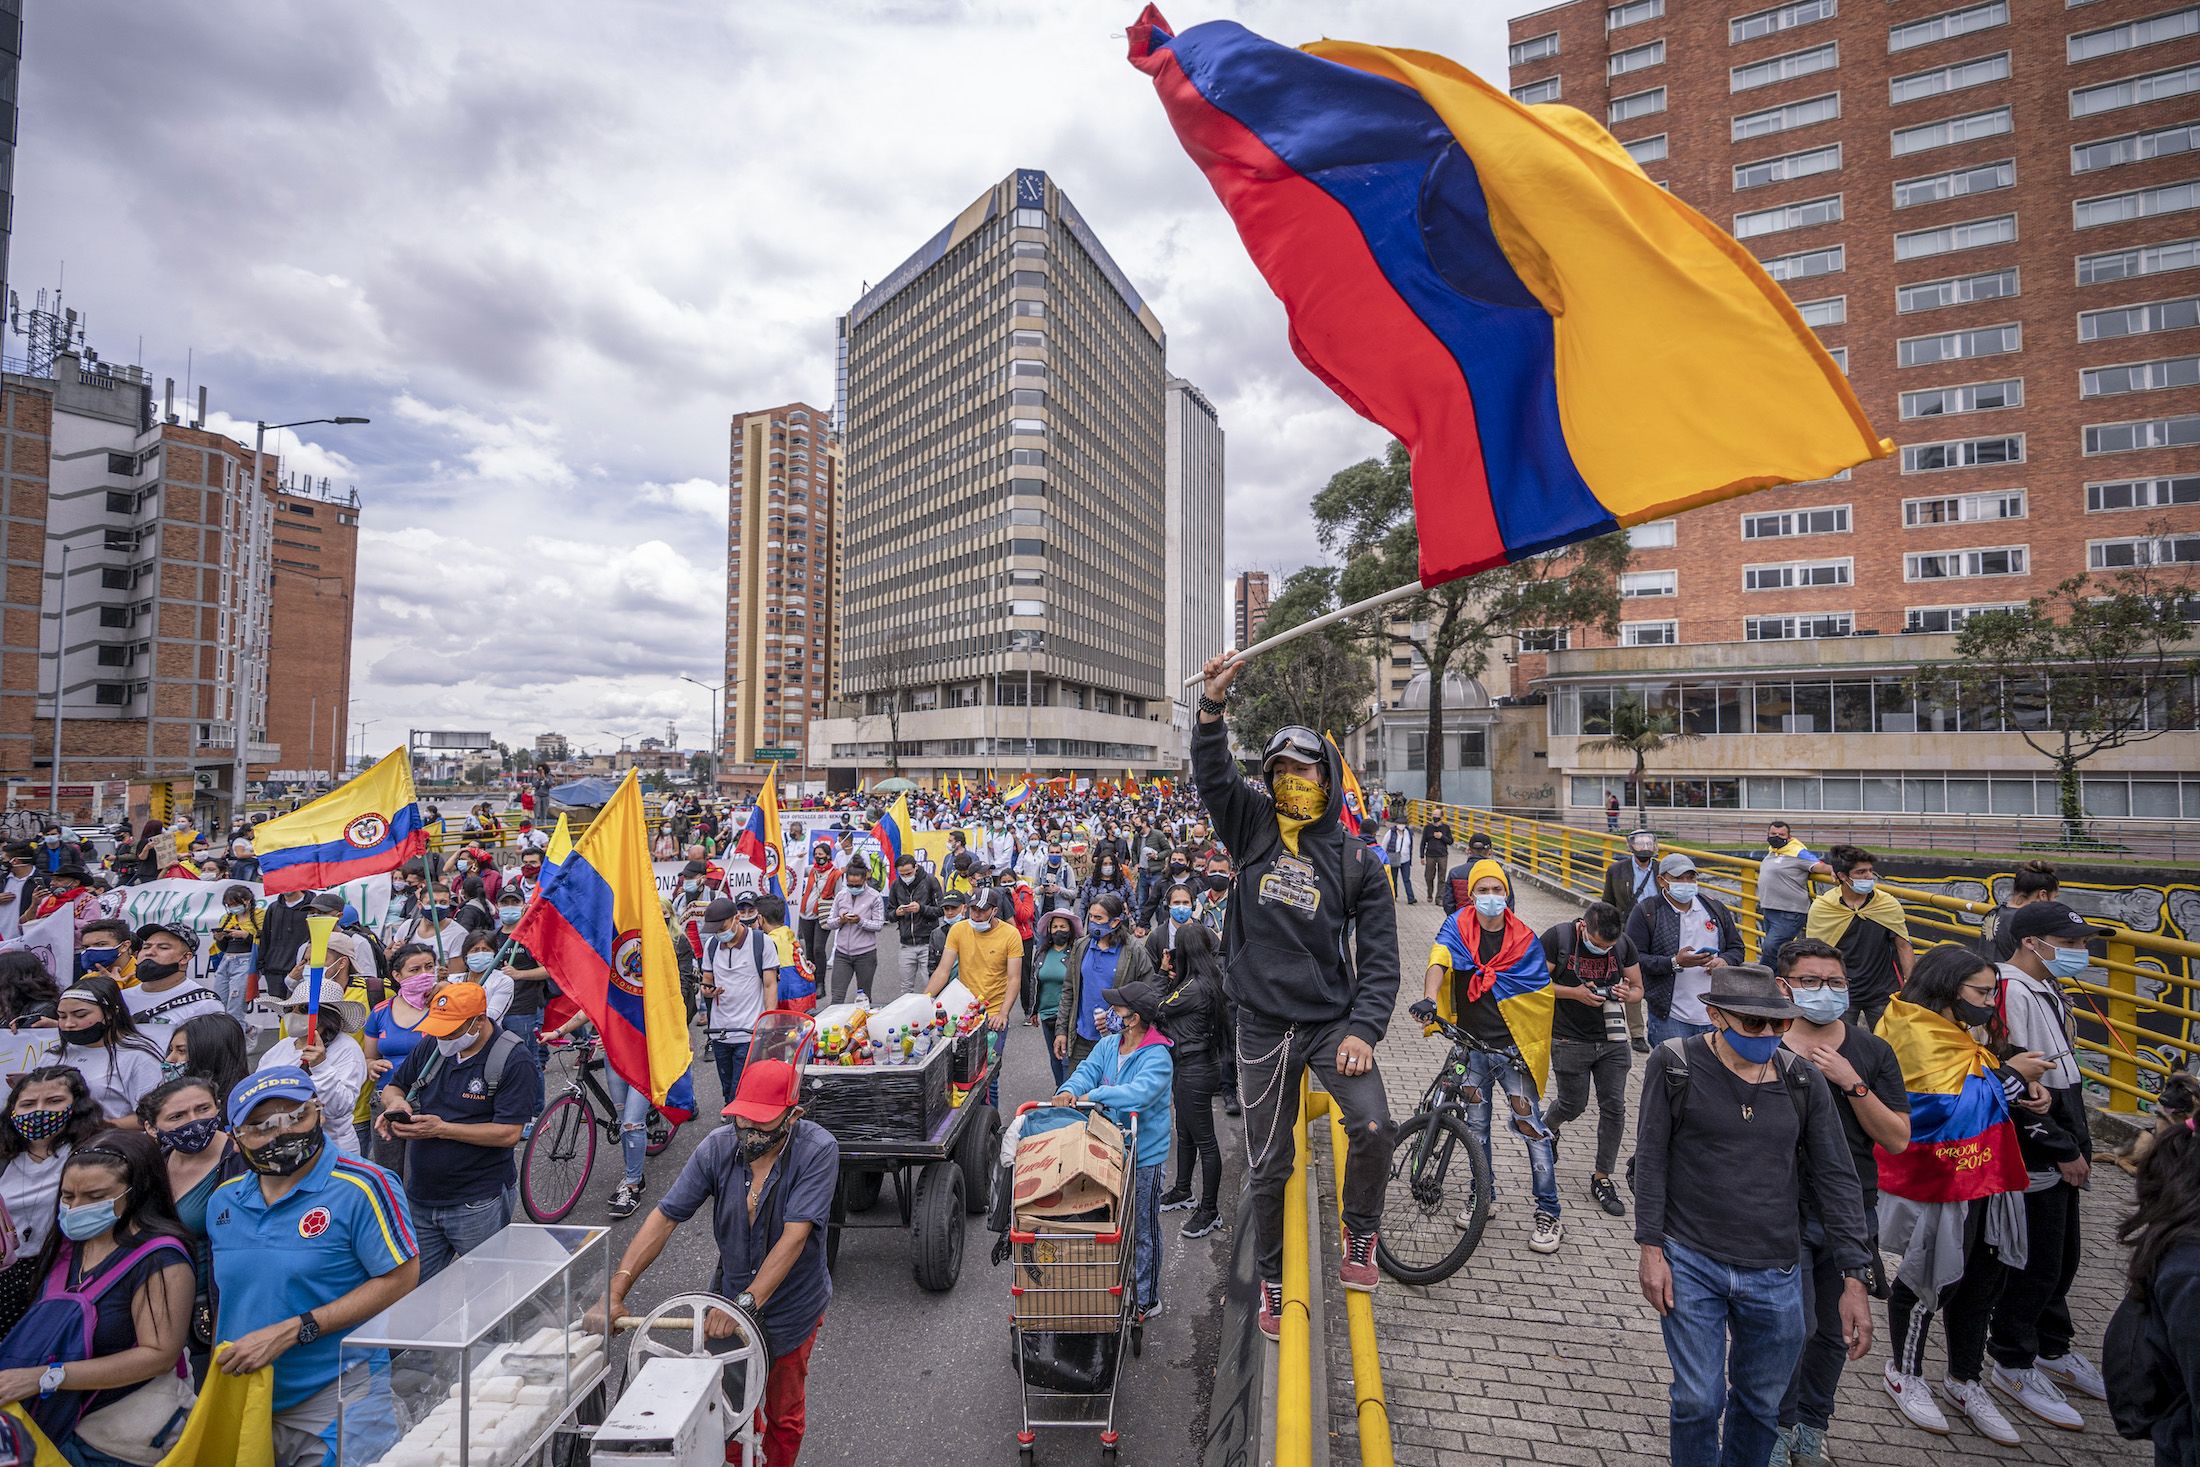 A demonstrator waves a Colombian flag while others walk by as part of a march during national strike on May 5, 2021 in Bogota, Colombia.